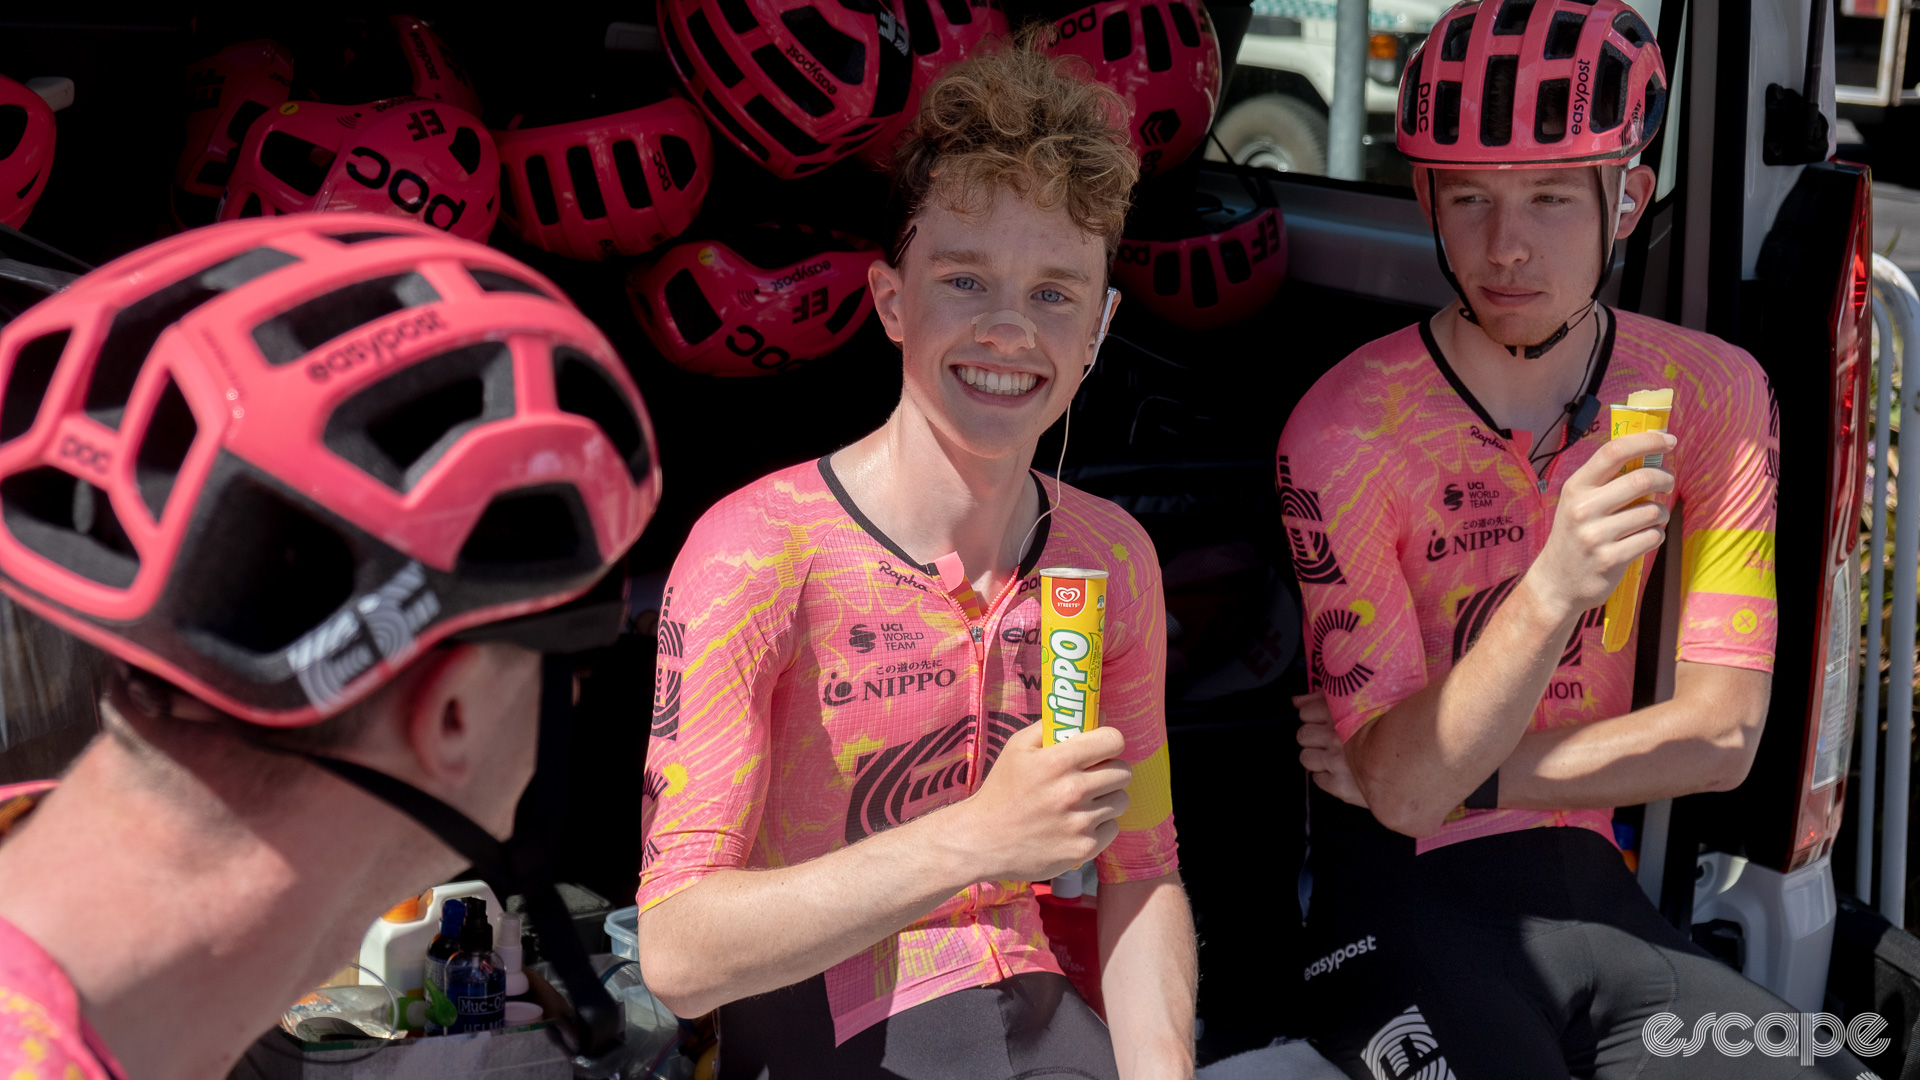 The photo shows Archie Ryan and two other Ef Education - Easypost riders eating Calippo ice lollies before a stage start.